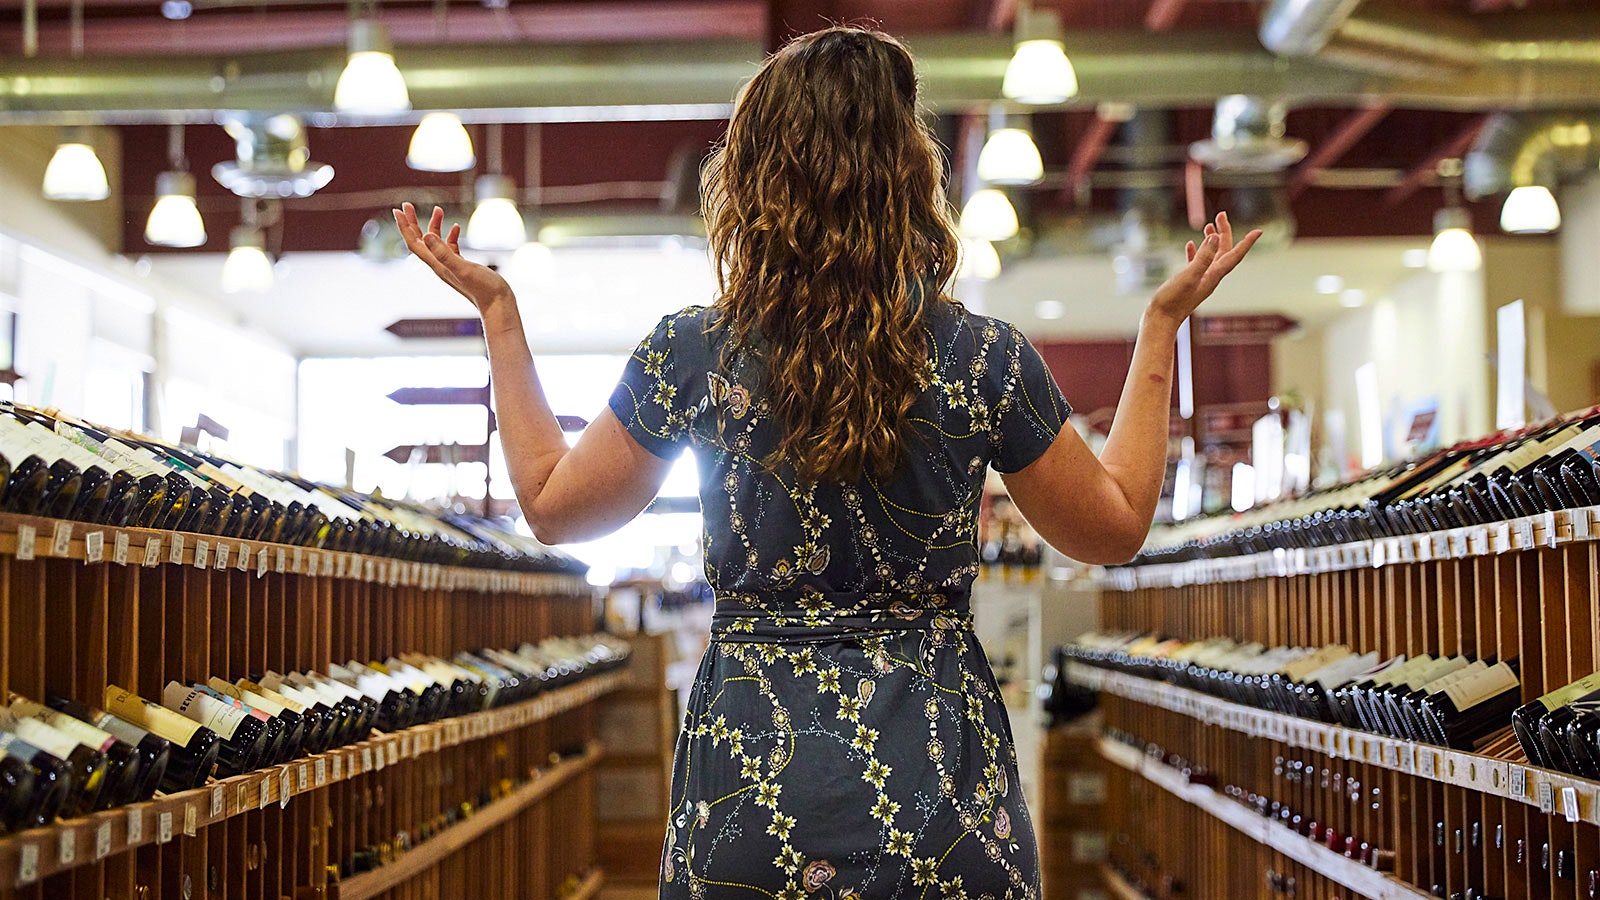  Young woman, seen from behind, throwing her hands up in the air amid the aisles of a fine wine shop